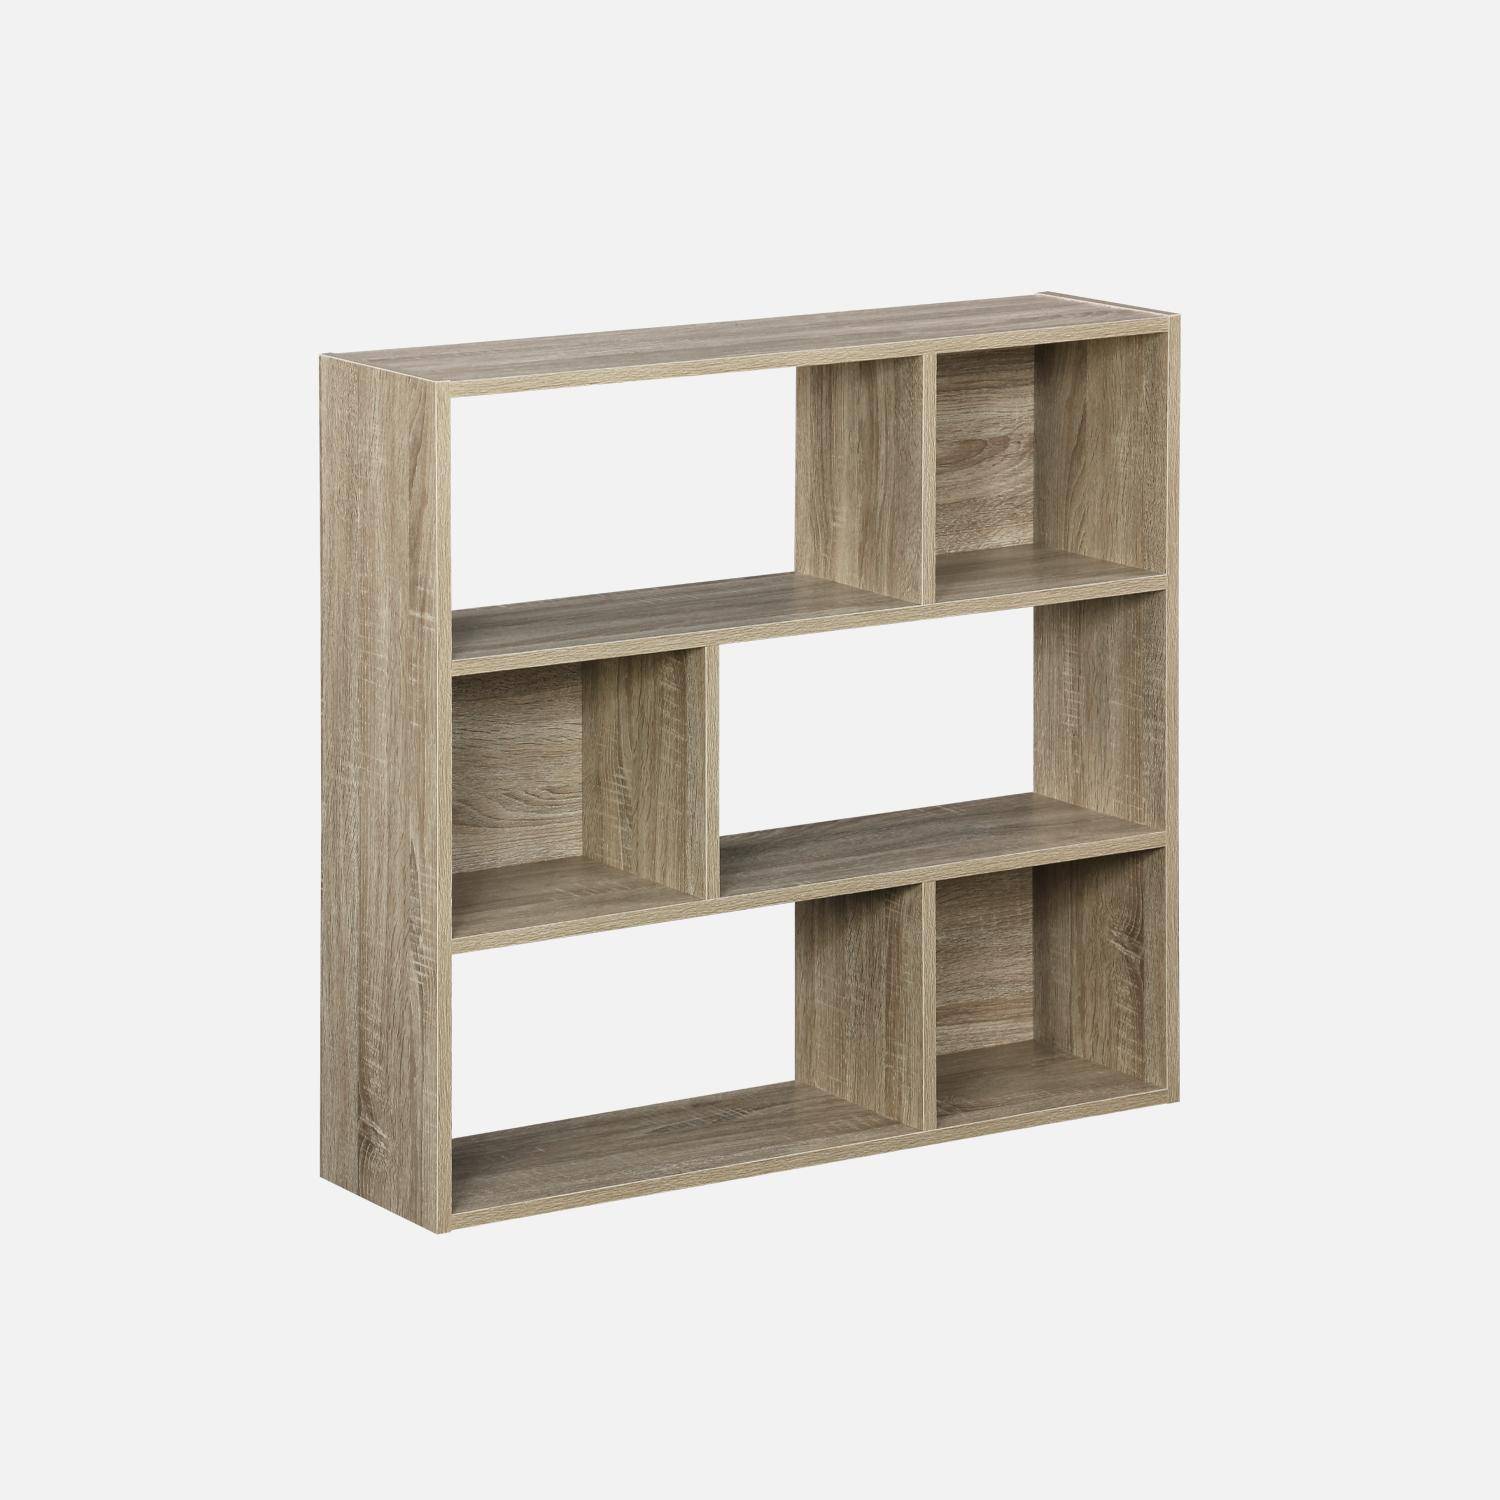 3-shelf bookcase with 6 storage compartments, L83xW23xH80cm, natural, Pieter,sweeek,Photo3